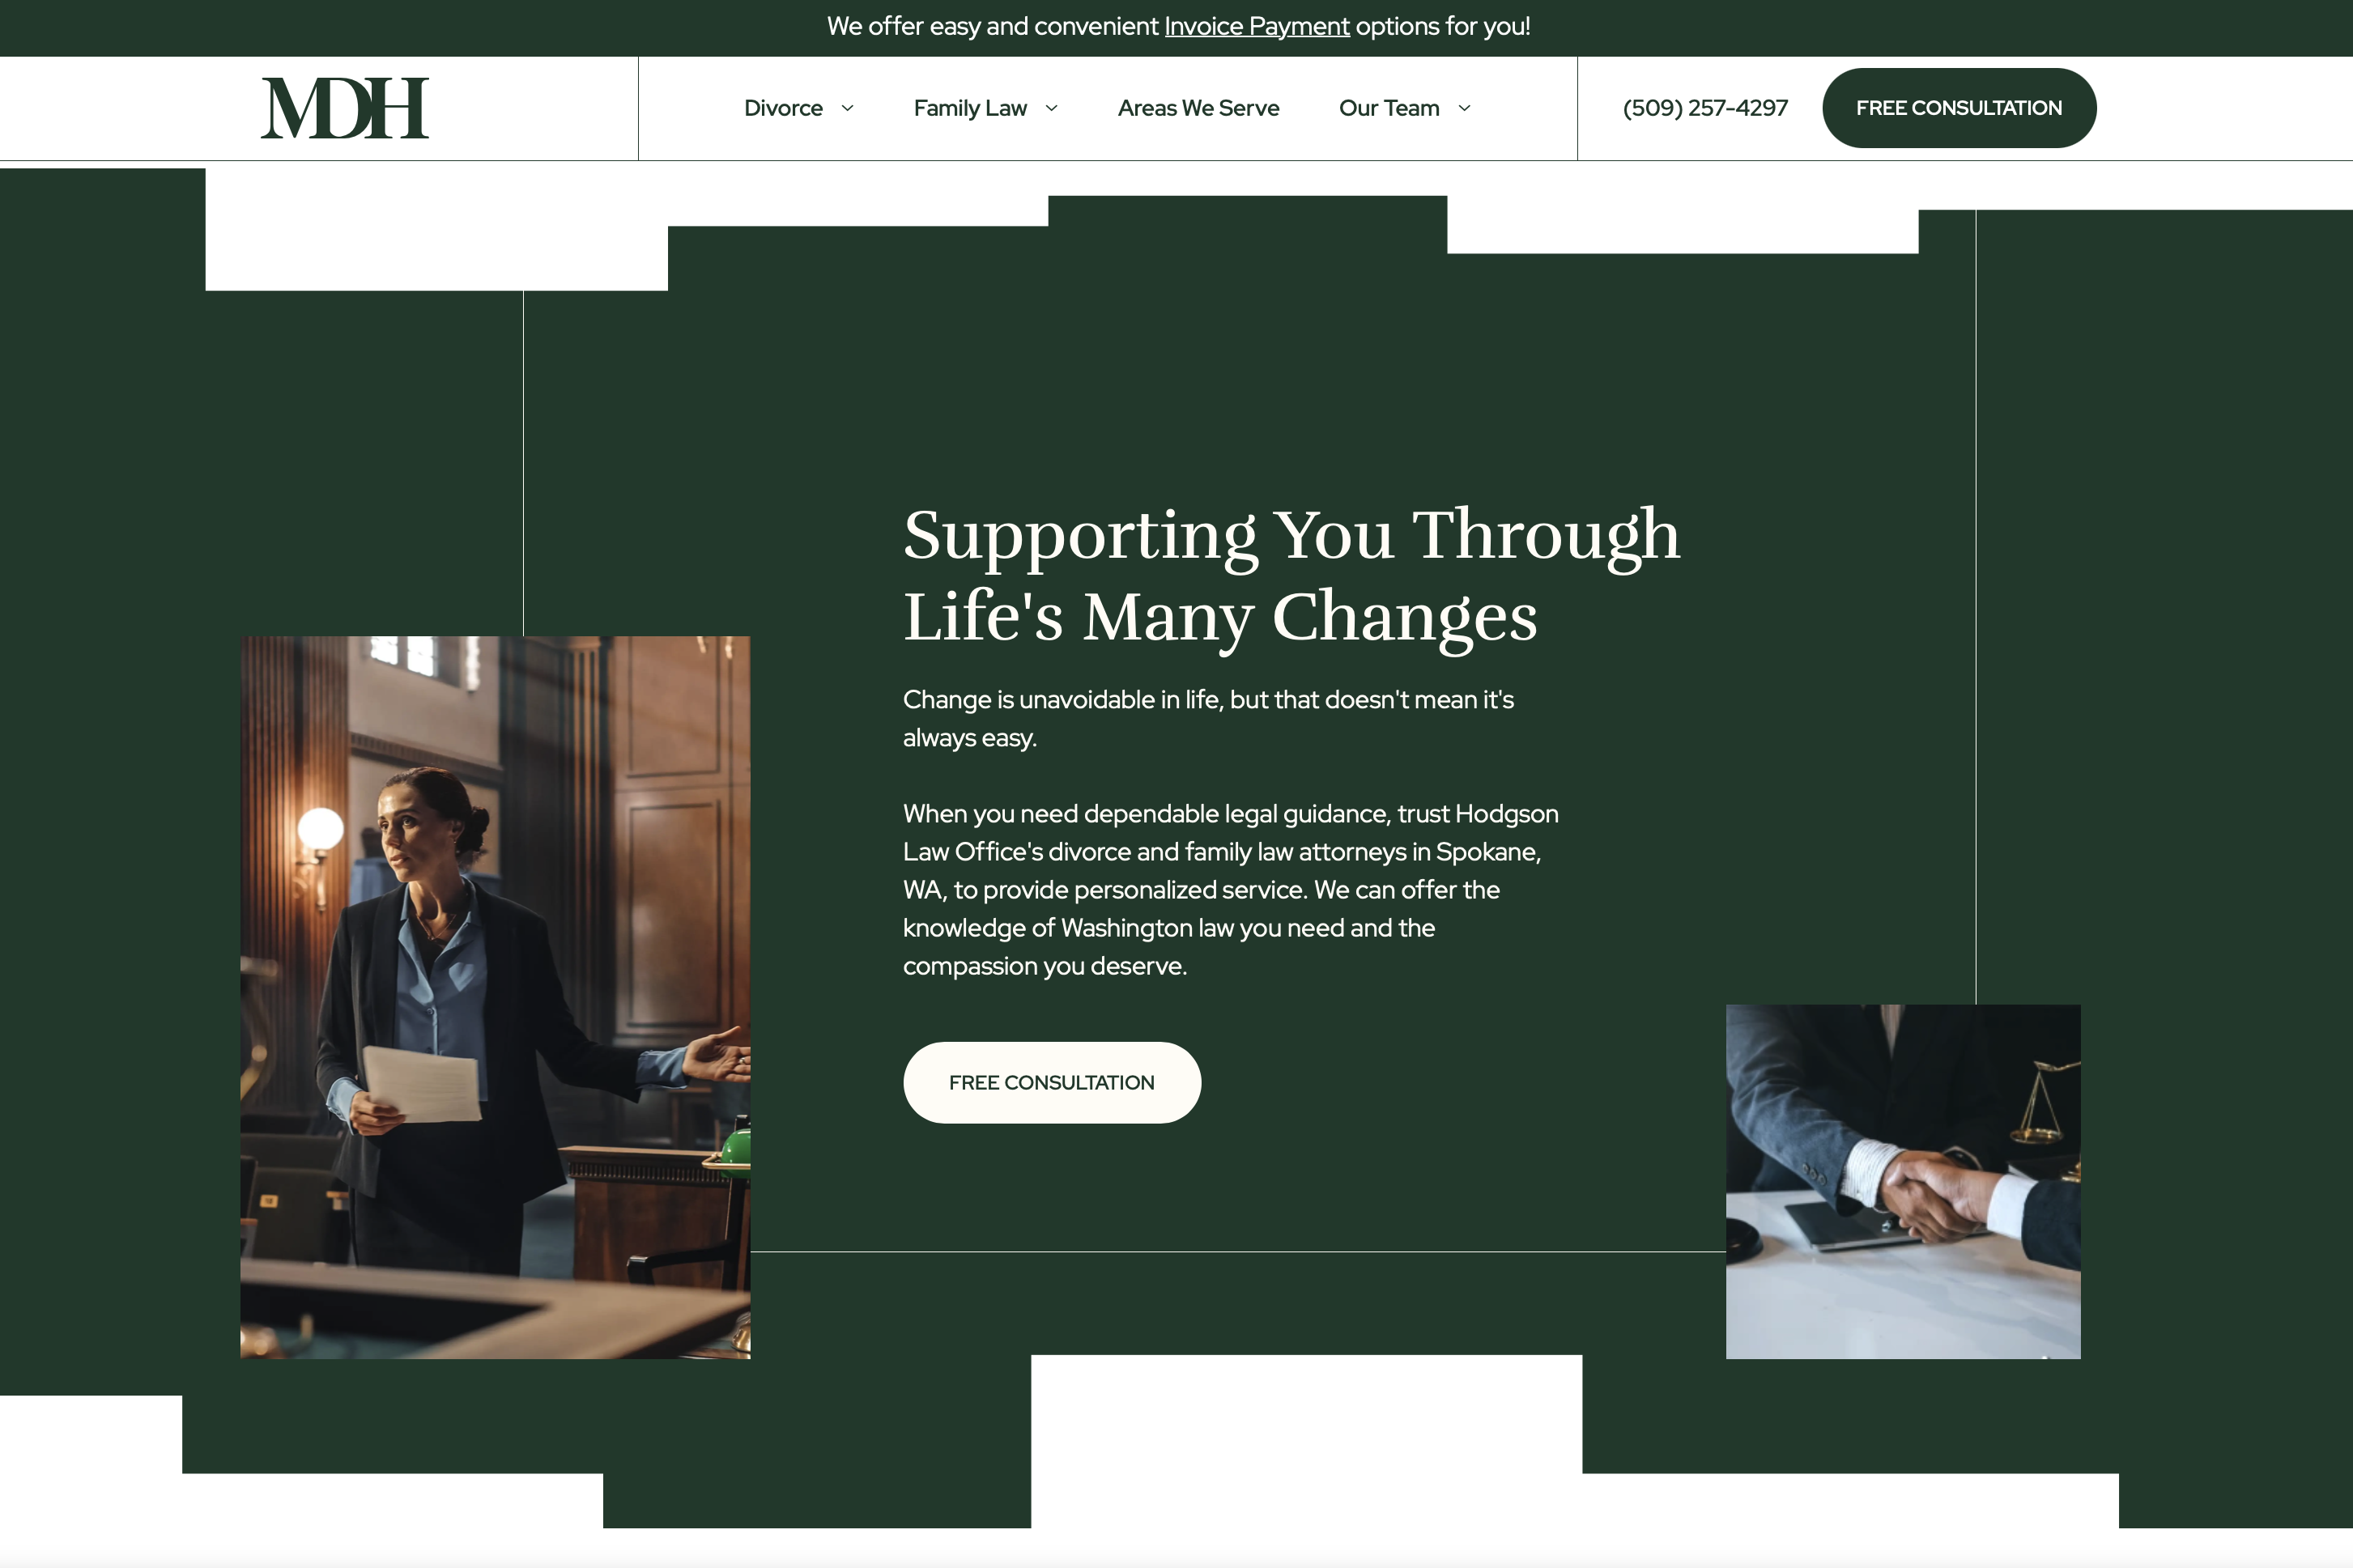 hodgson law offices best law firm website